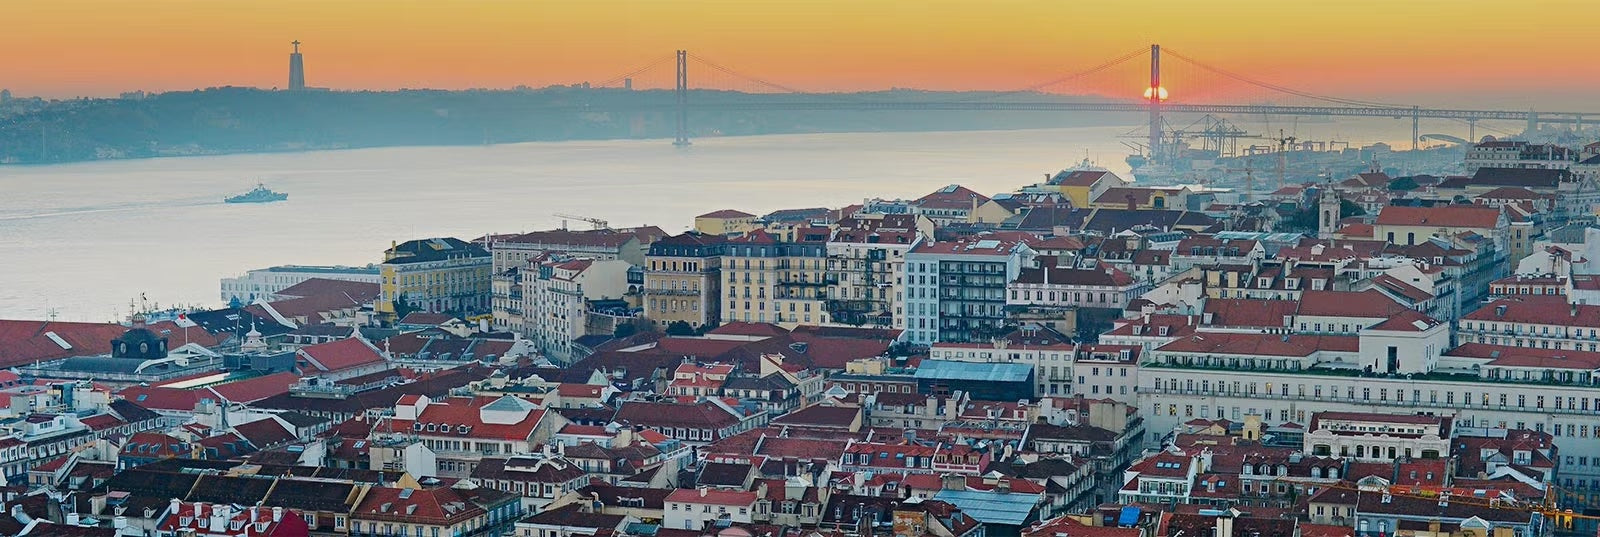 are you in lisbon? ok, we're portuguese and we'll give you inside tips